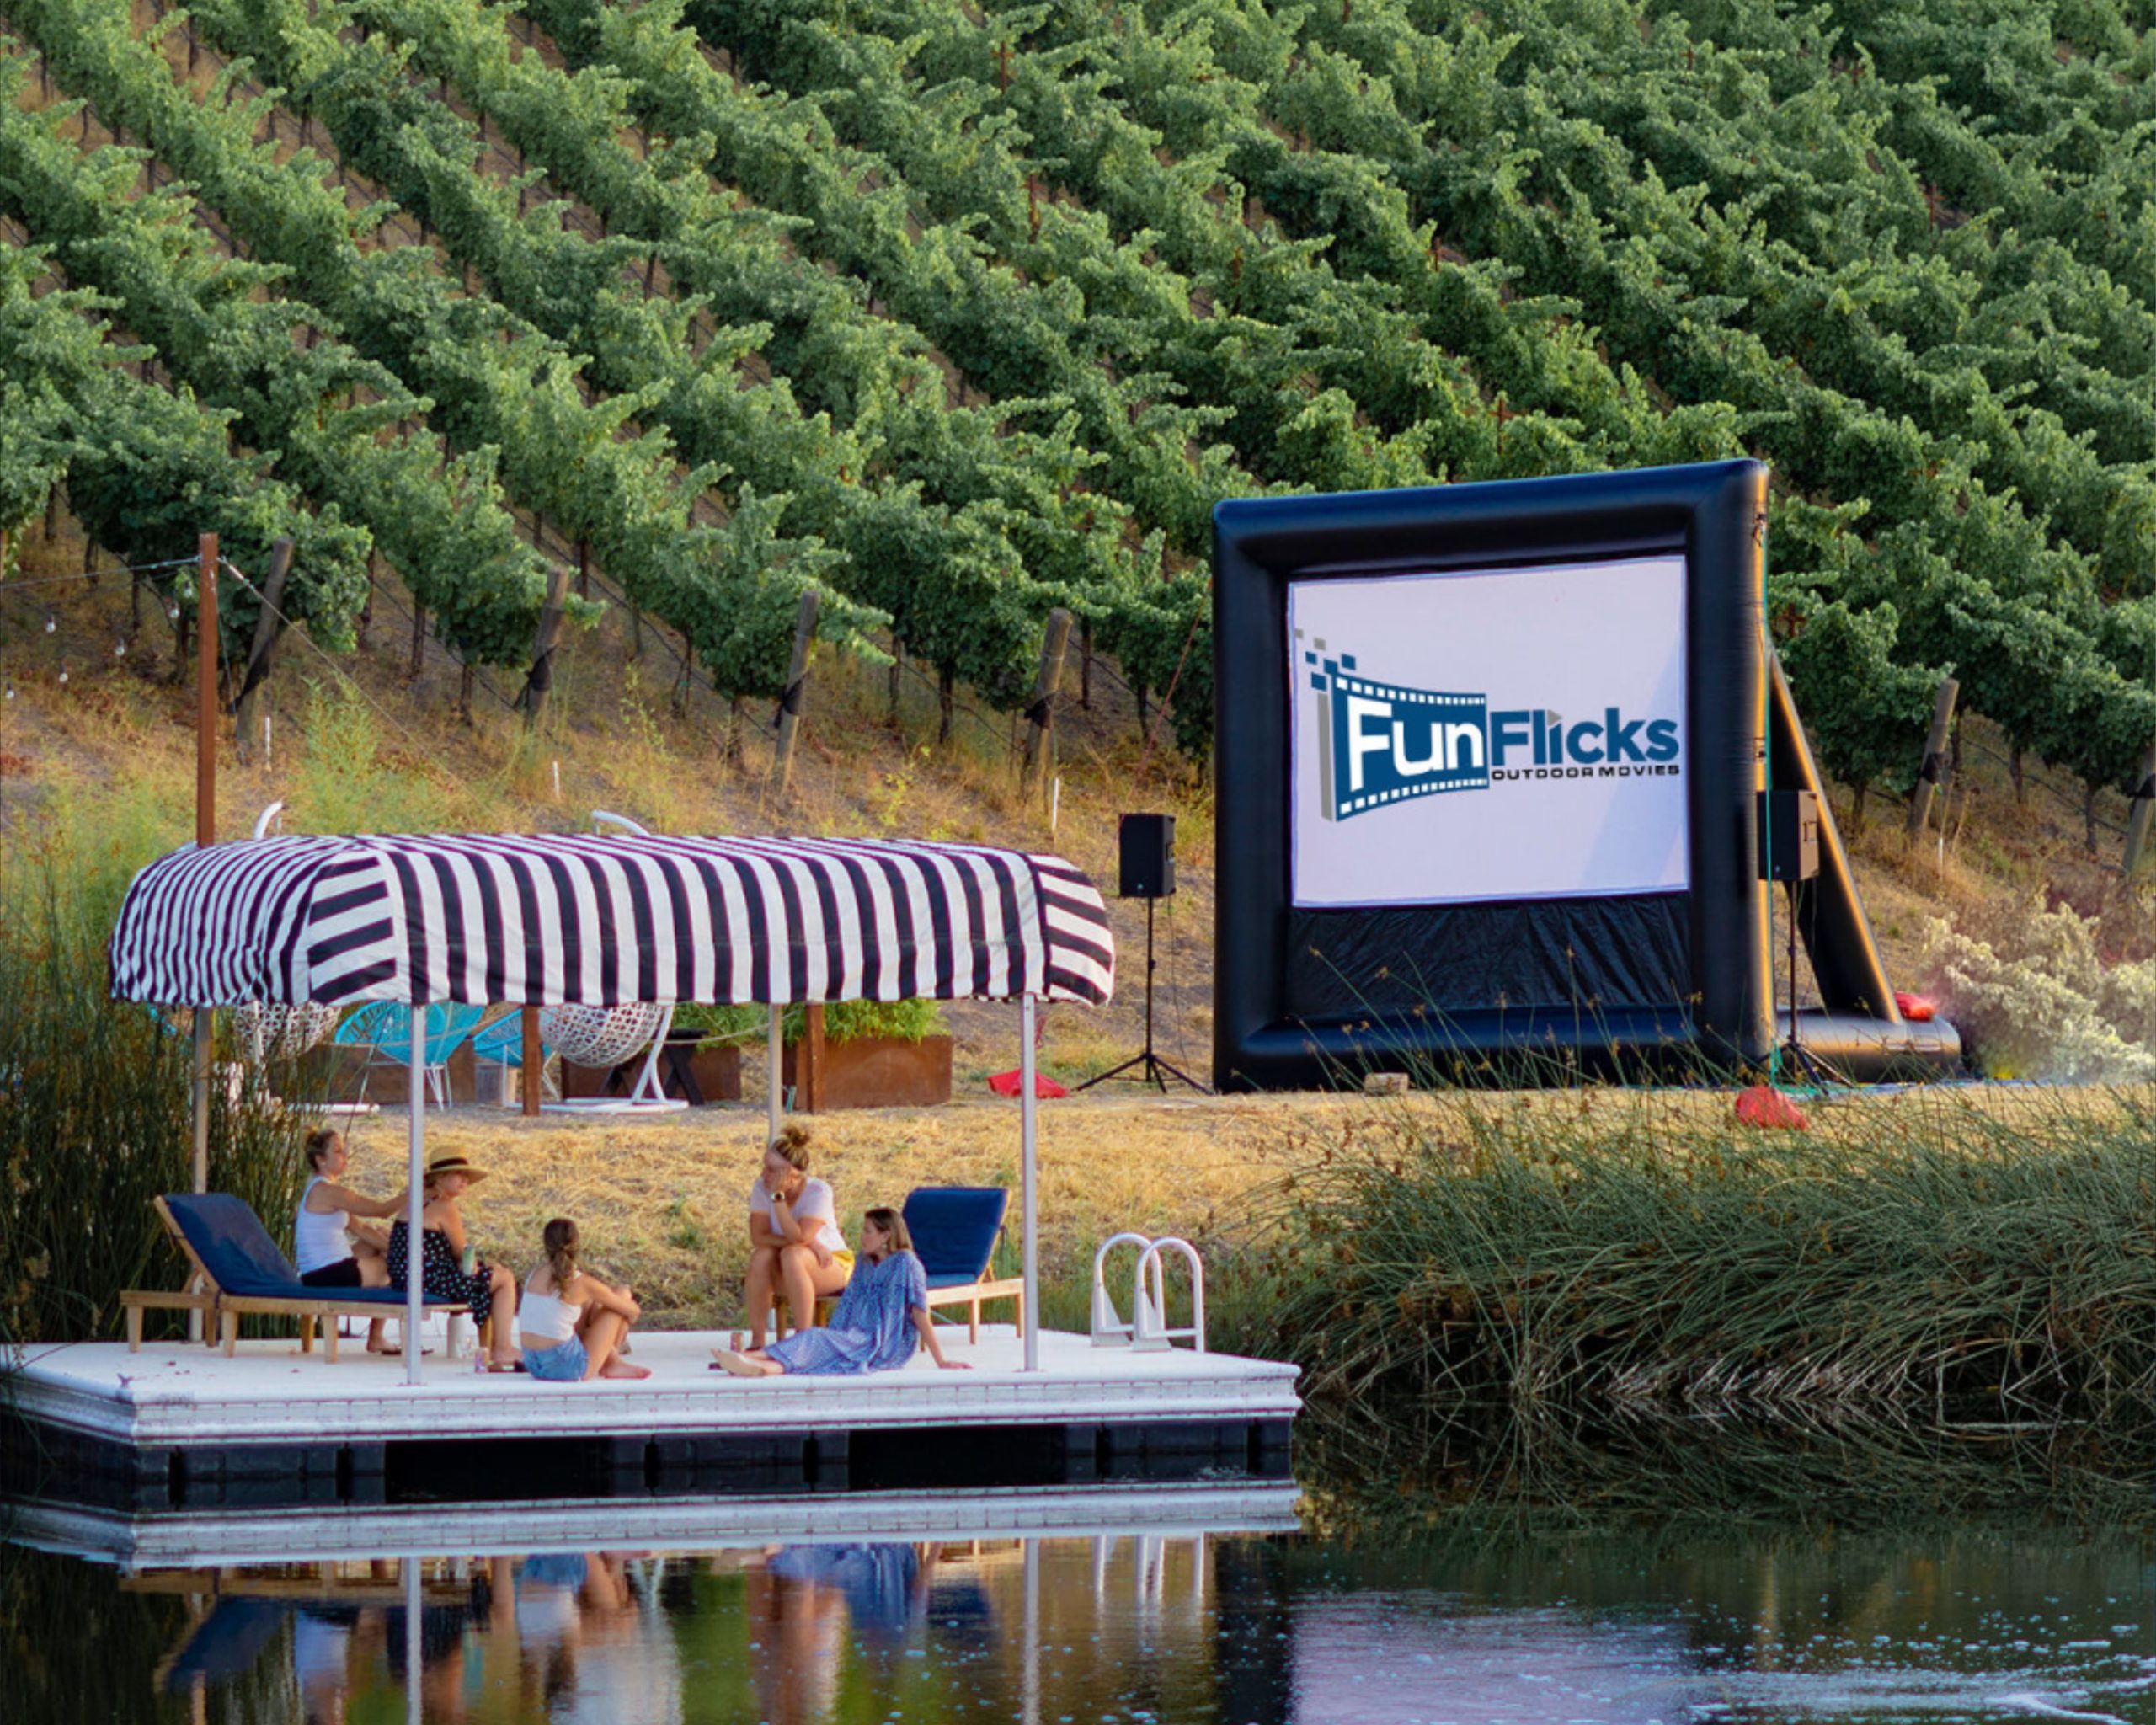 Family and friends watching a movie on a FunFlicks inflatable screen at their community winery.